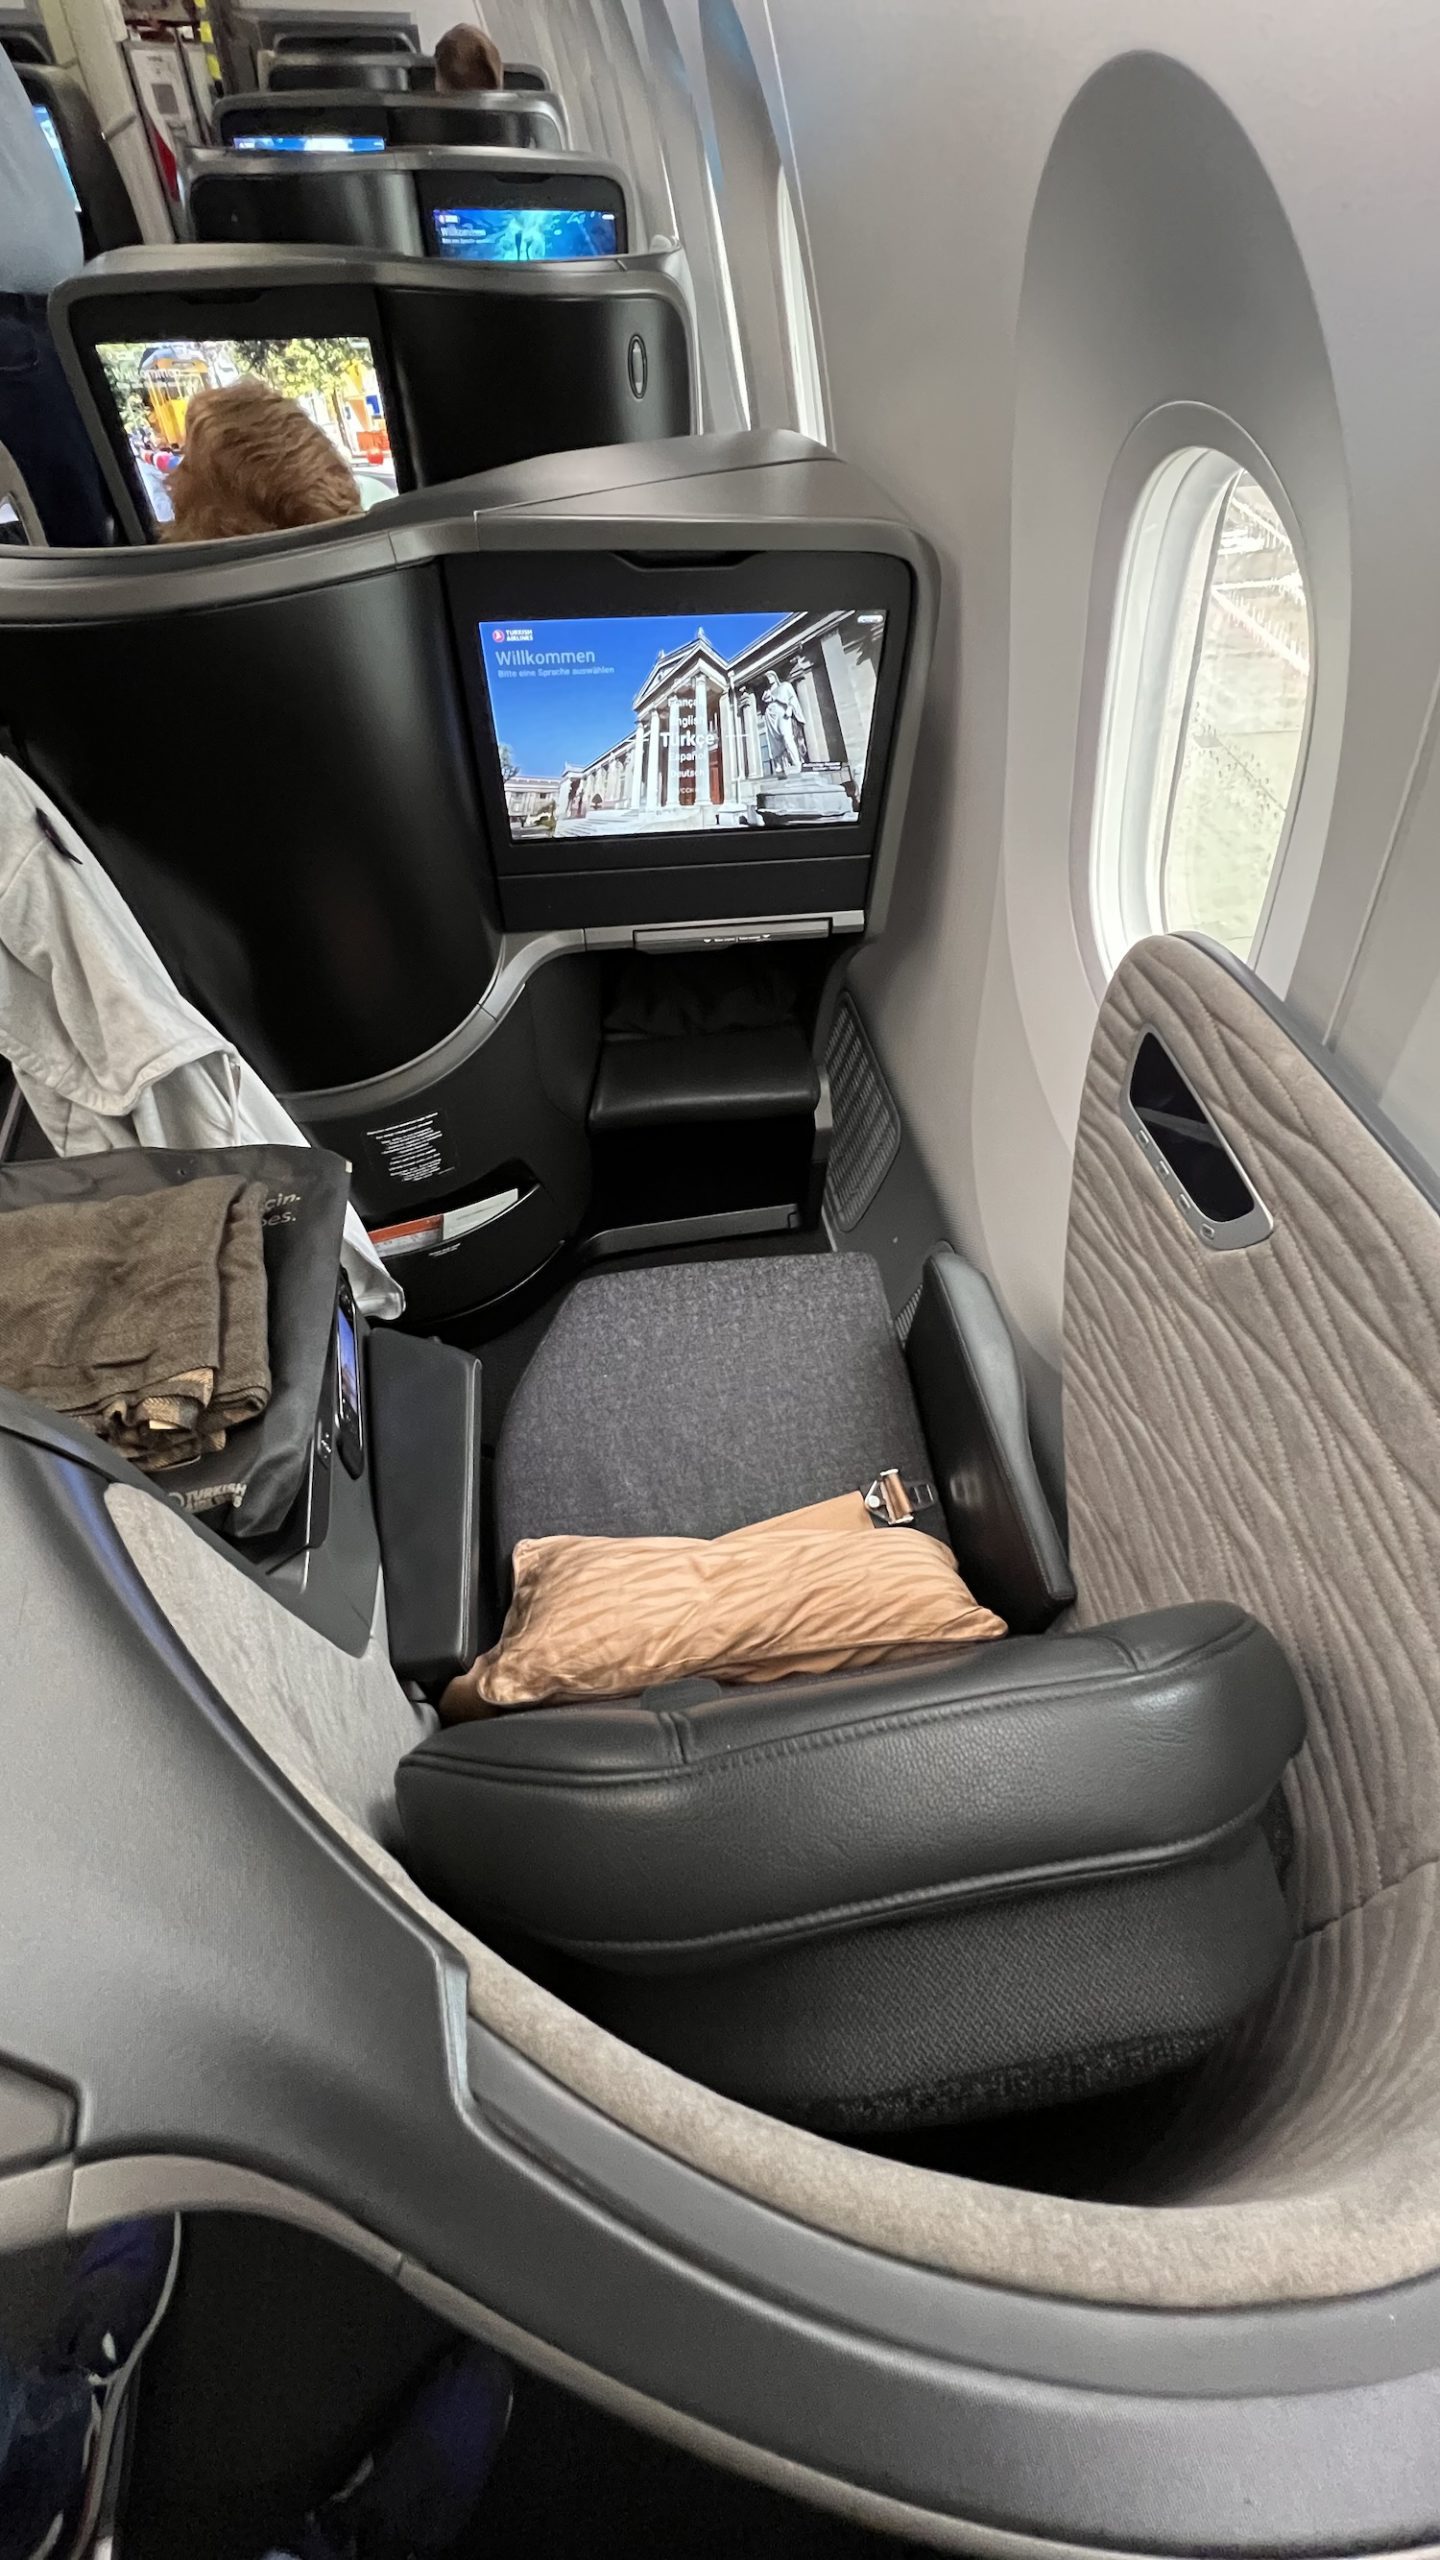 Turkish Airlines B787 Business Class